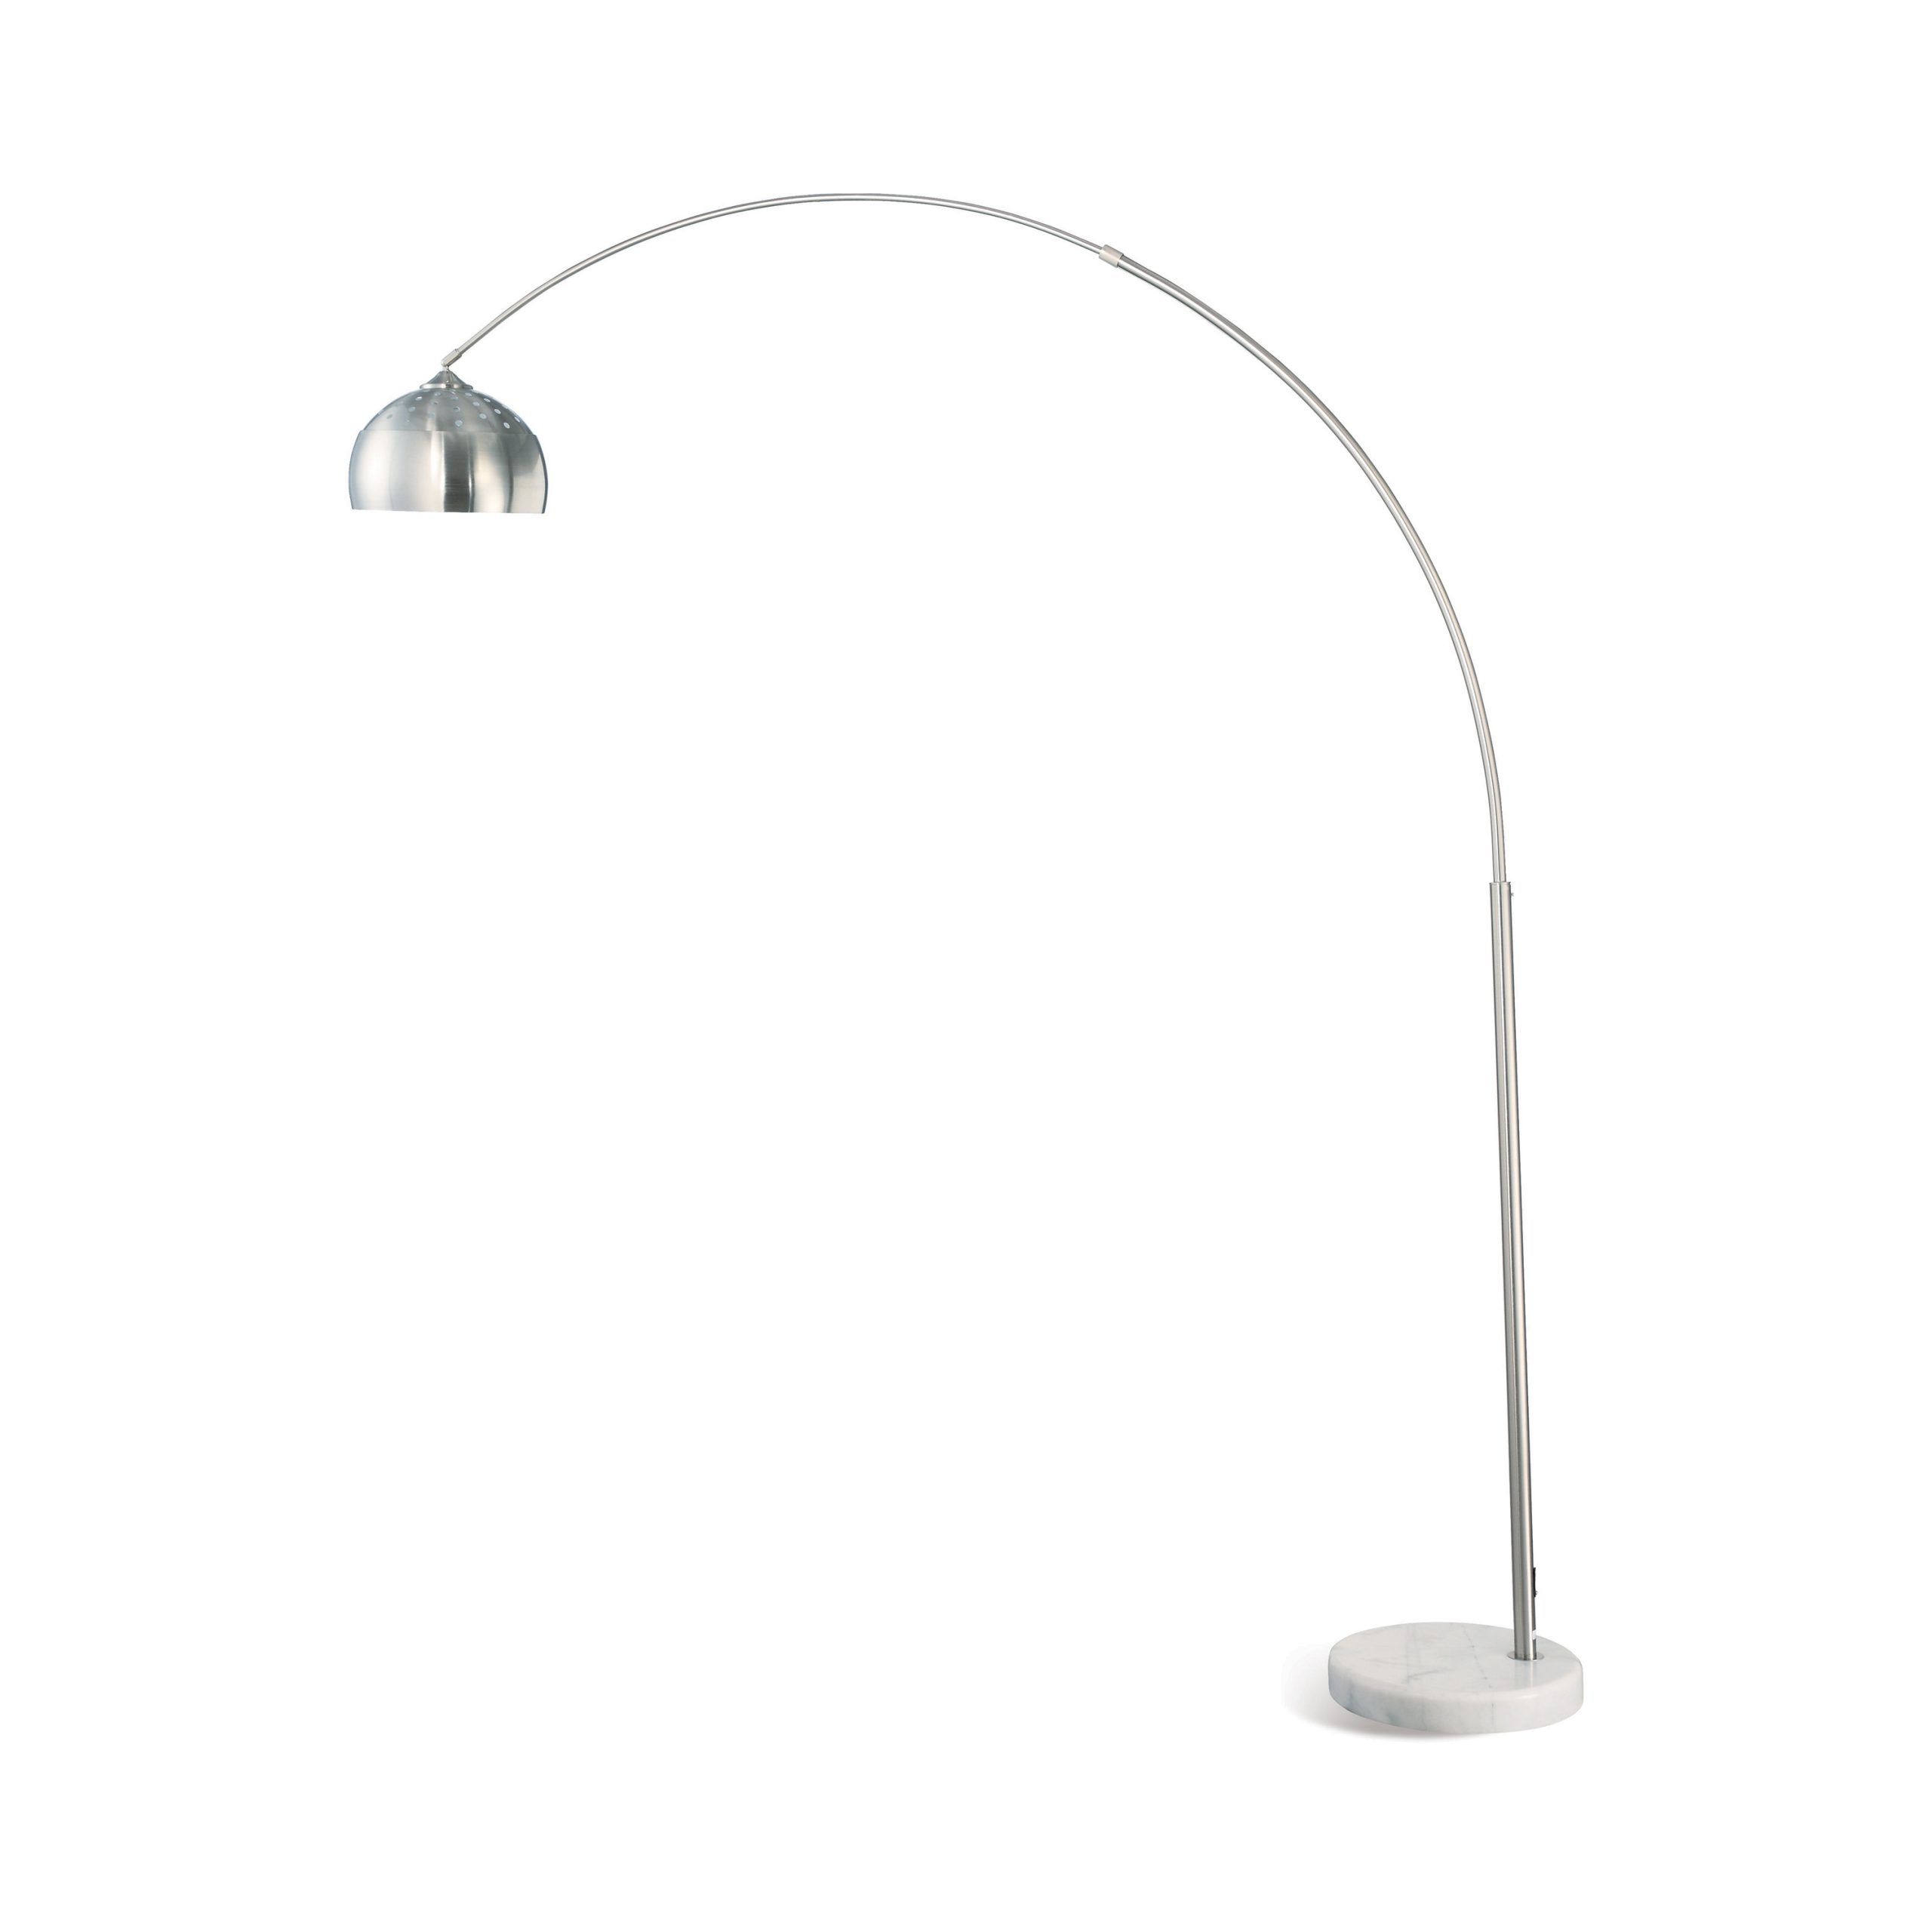 Arched Floor Lamp Brushed Steel And Chrome – Coaster Fine Fu Inside Arc Floor Lamps (View 14 of 20)